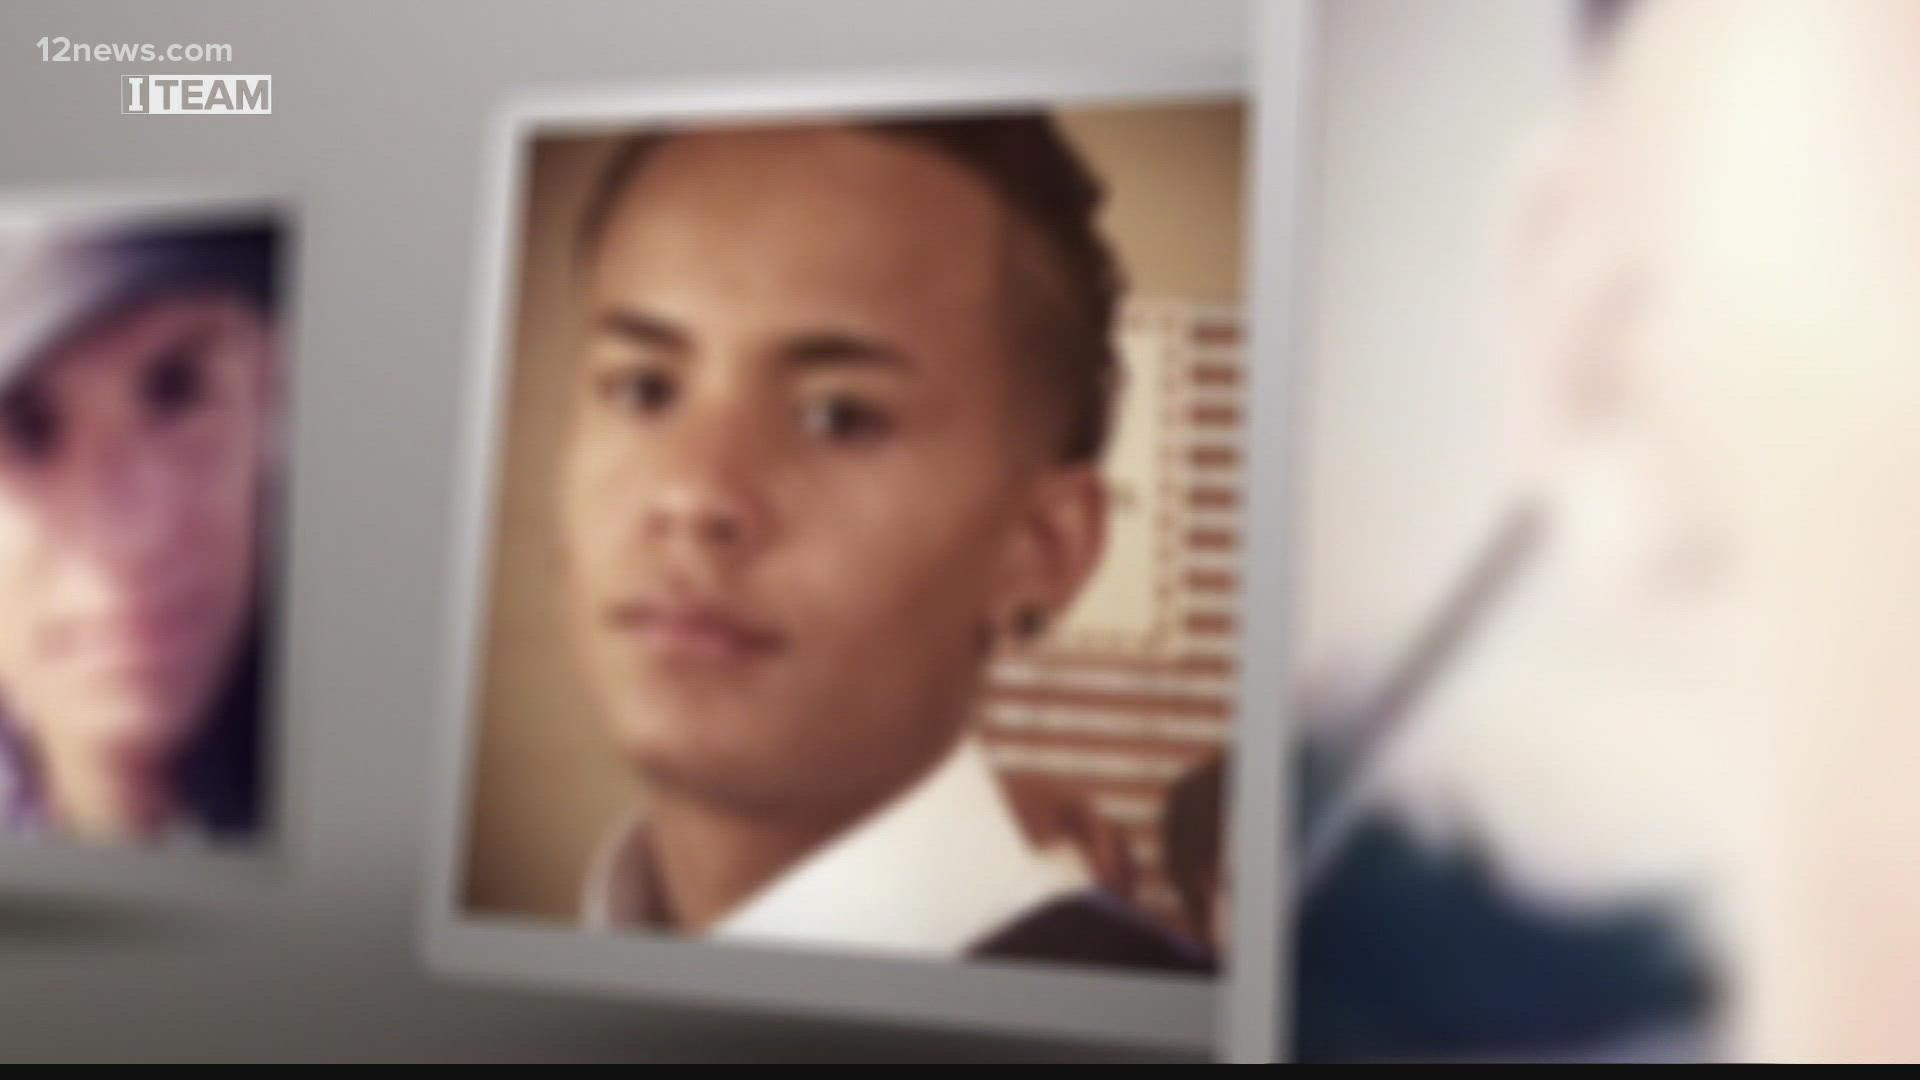 The father of an accused killer and the father of his victim are both pushing for change in Arizona's system of care they claim failed both of their sons.